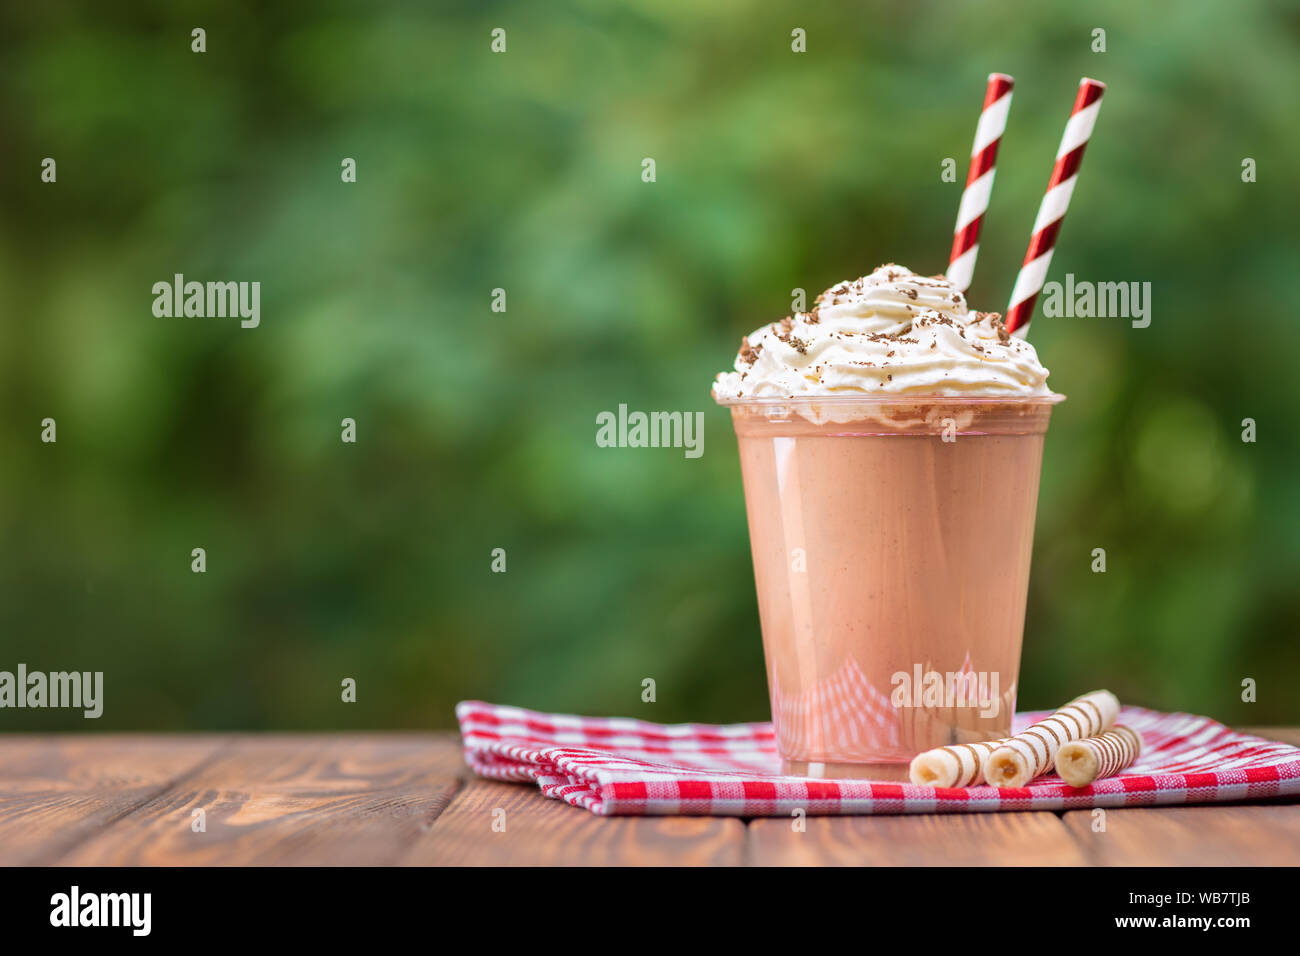 https://c8.alamy.com/comp/WB7TJB/chocolate-milkshake-in-disposable-plastic-cup-with-whipped-cream-and-wafer-rolls-on-wooden-table-outdoors-WB7TJB.jpg